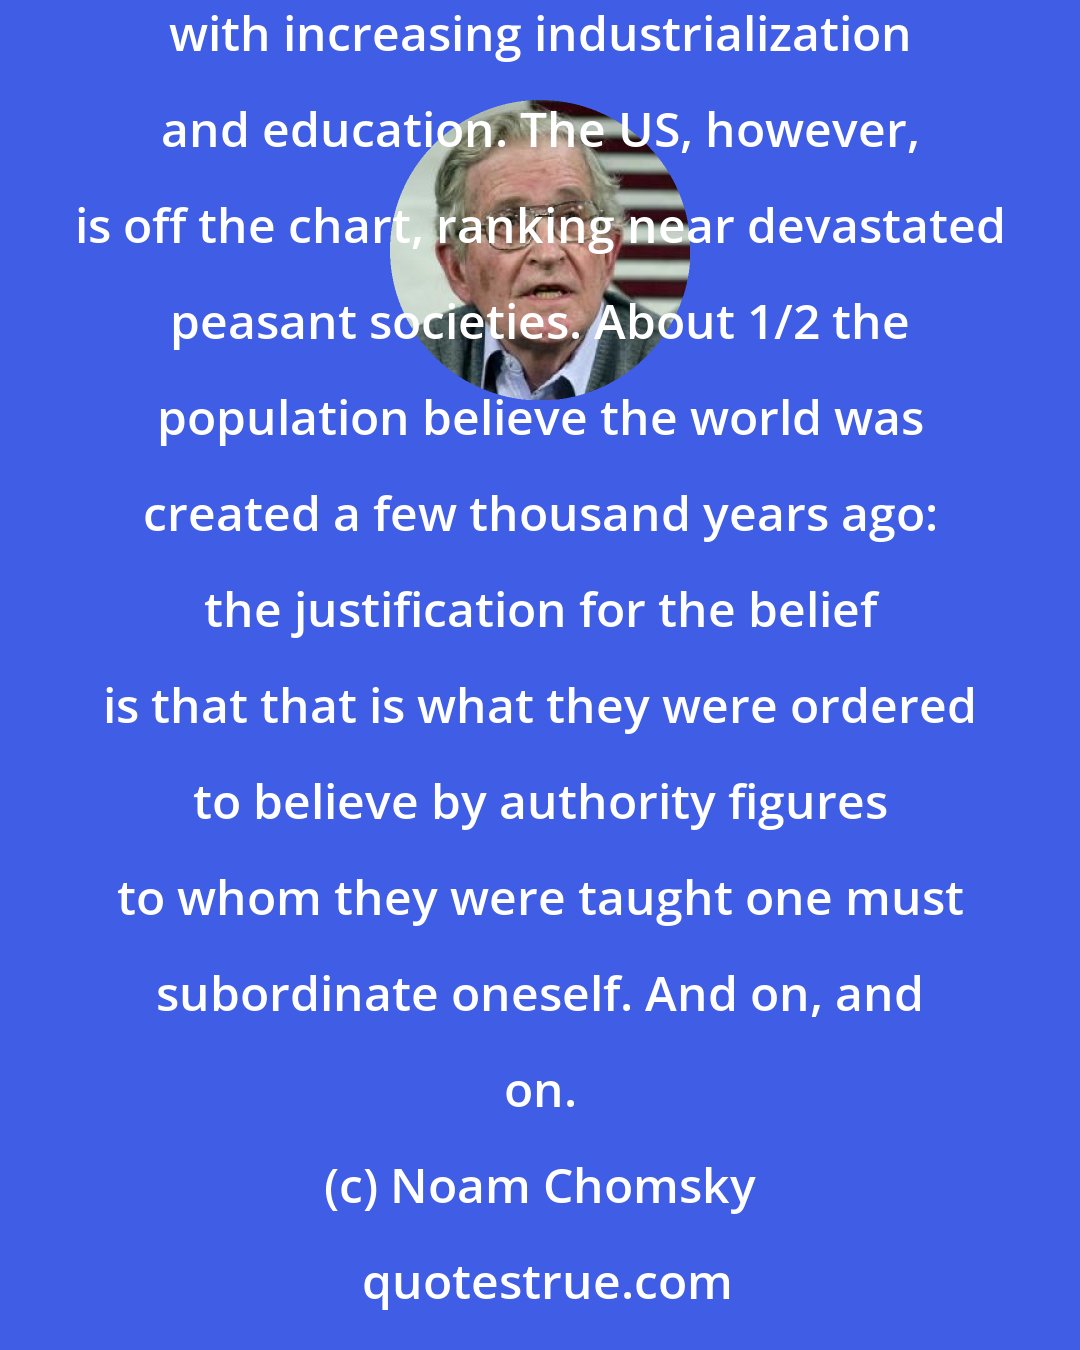 Noam Chomsky: There have, for years, been comparative studies of religious fanaticism and factors that correlate with it. By and large, it tends to decline with increasing industrialization and education. The US, however, is off the chart, ranking near devastated peasant societies. About 1/2 the population believe the world was created a few thousand years ago: the justification for the belief is that that is what they were ordered to believe by authority figures to whom they were taught one must subordinate oneself. And on, and on.